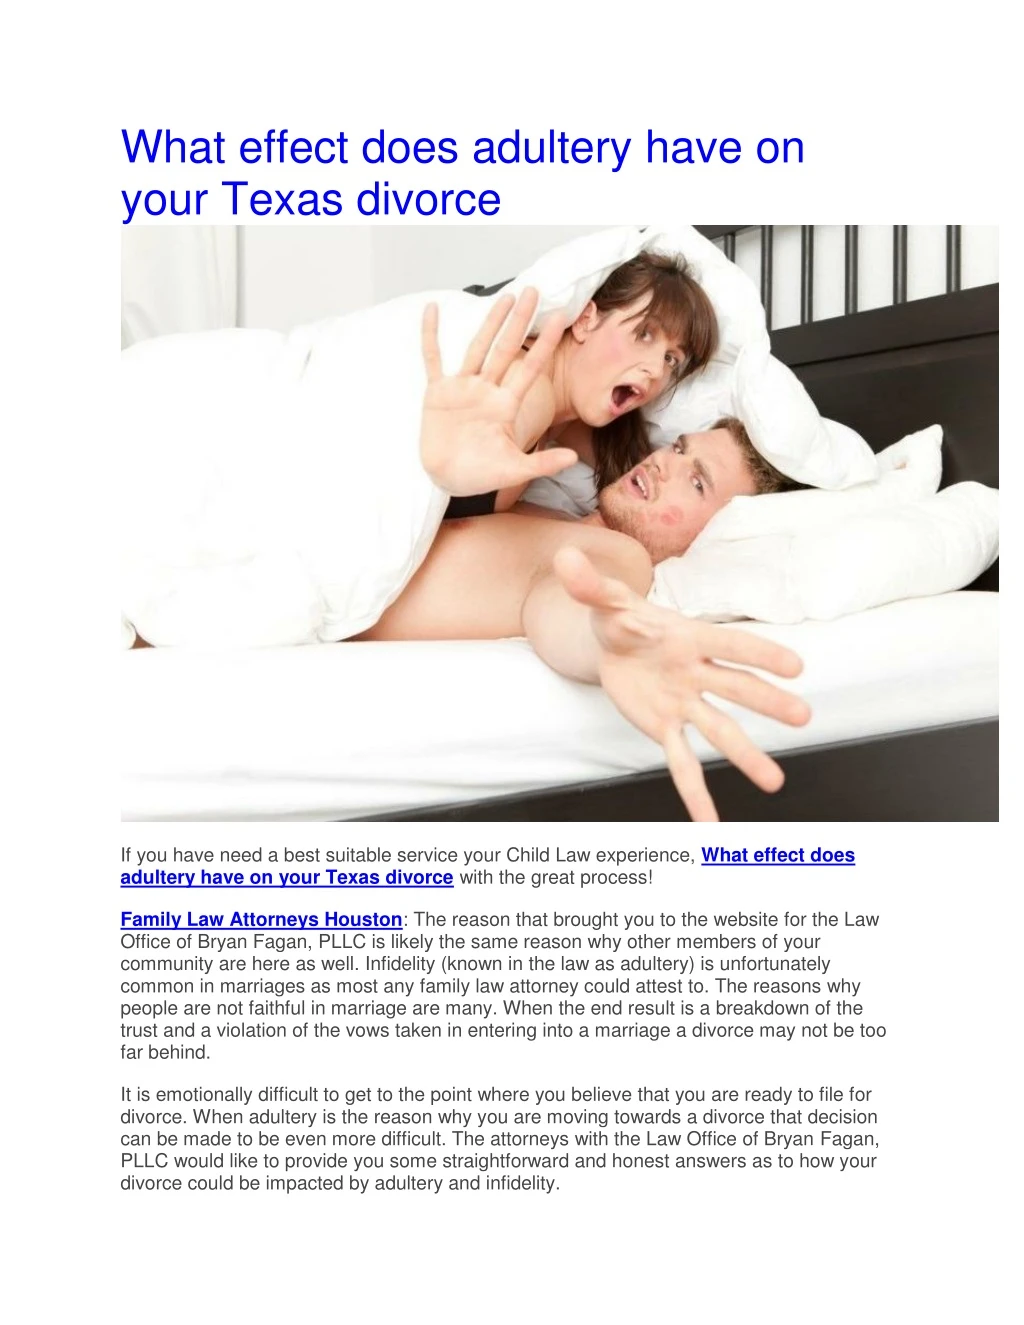 what effect does adultery have on your texas